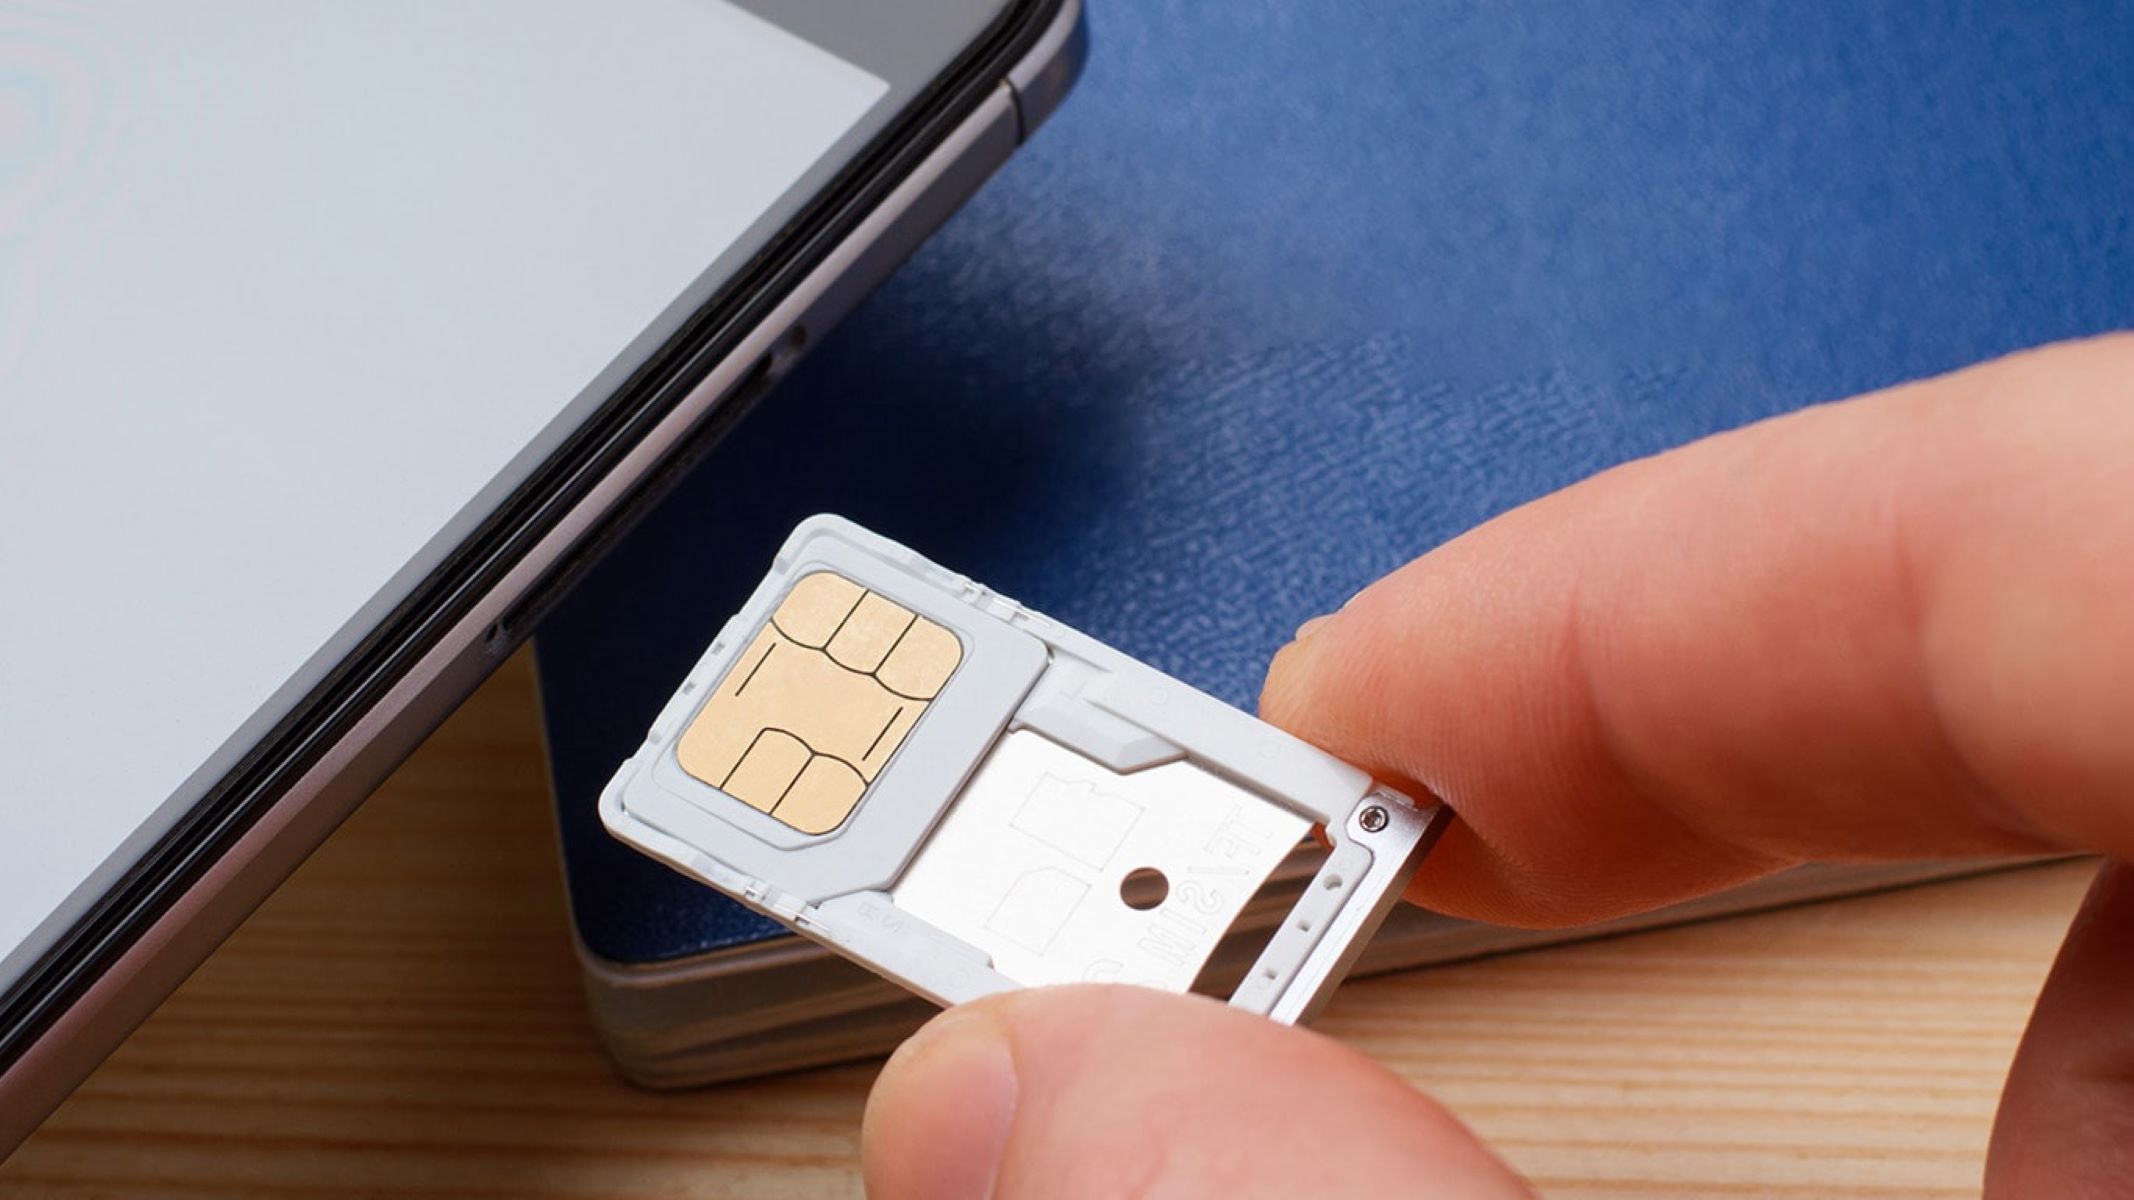 Consequences Of Taking Out SIM Card: What To Expect